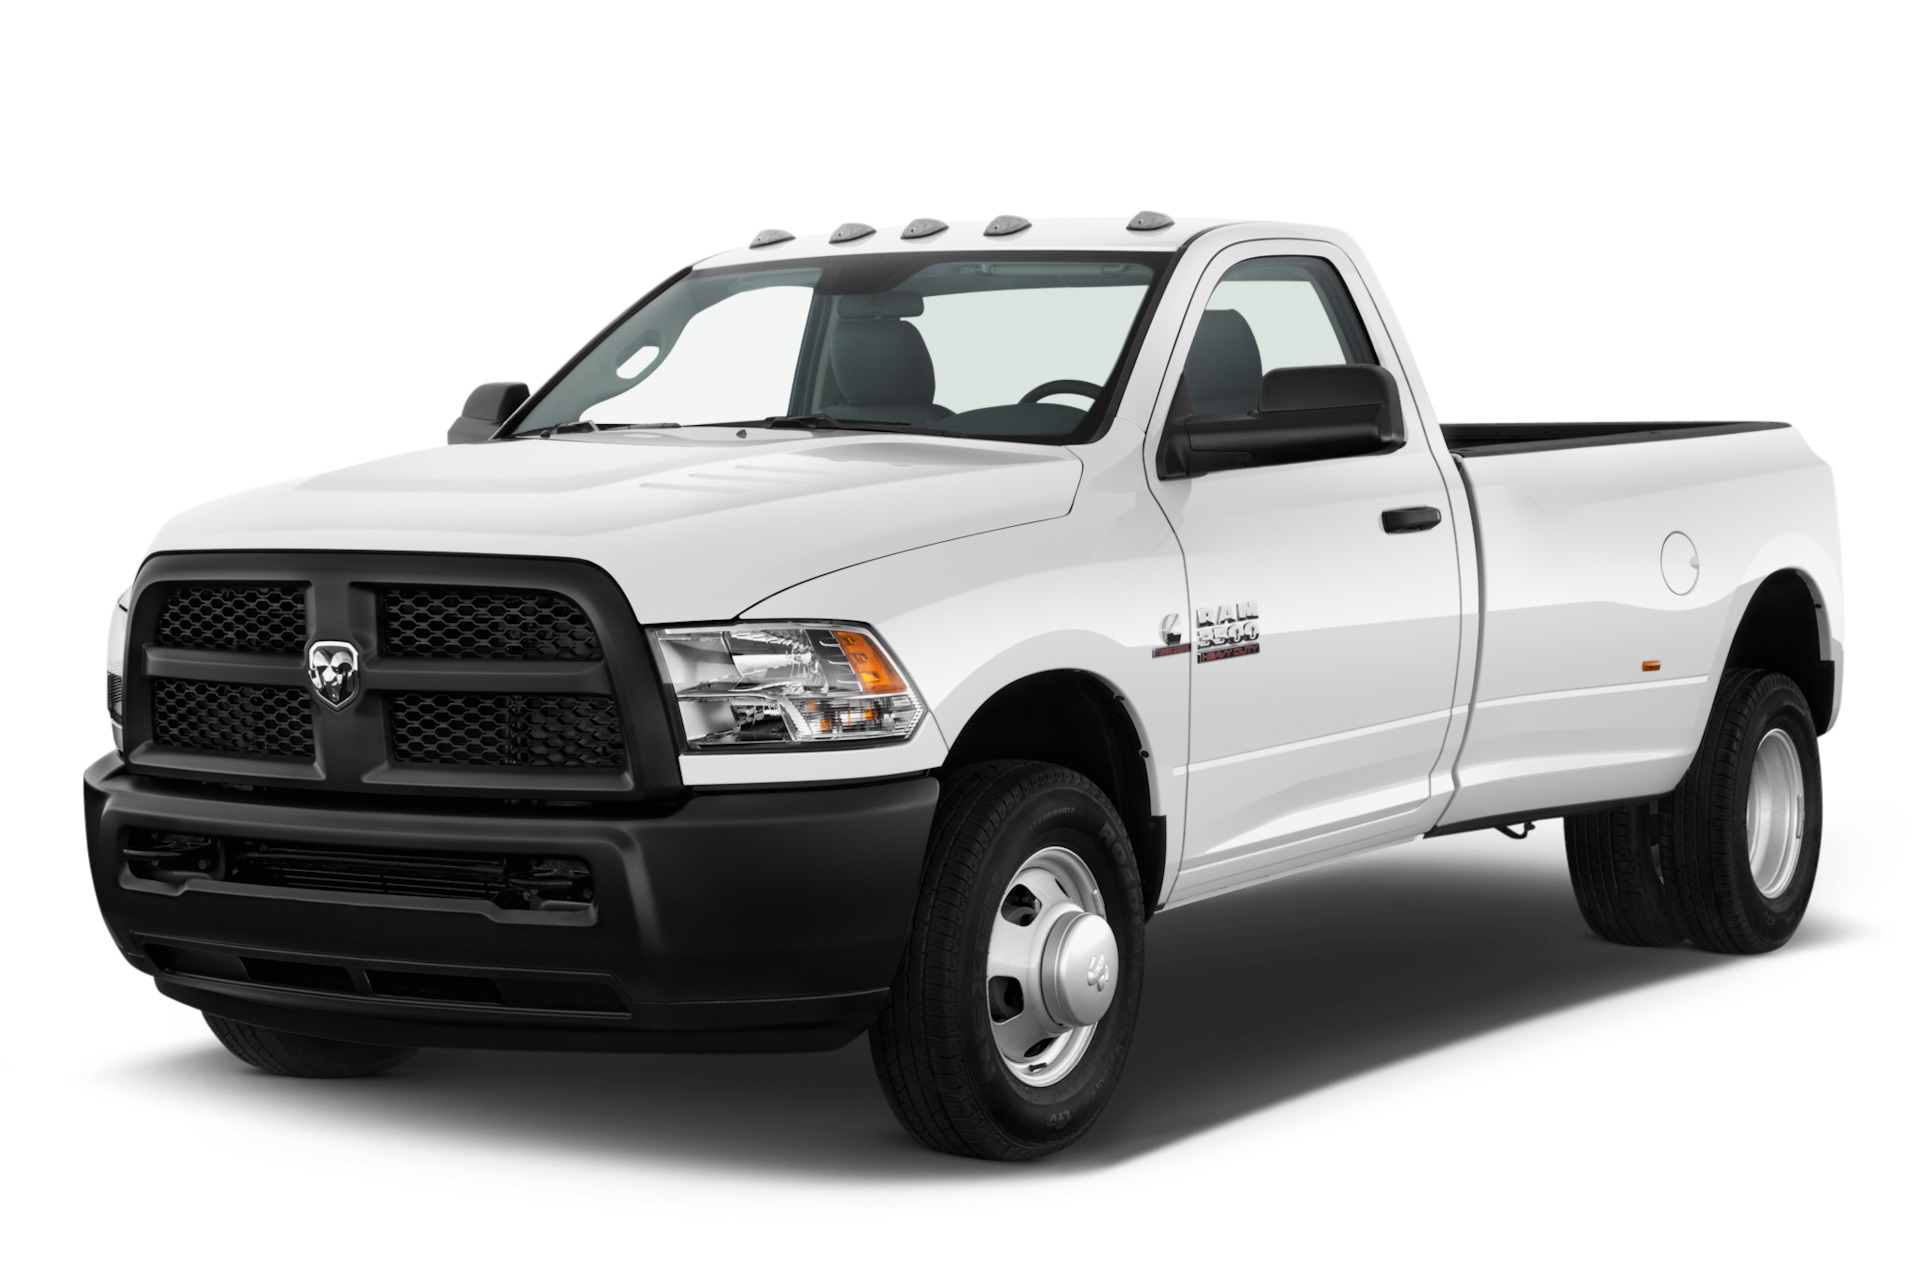 2016 Ram 3500 Prices, Reviews, and Photos - MotorTrend